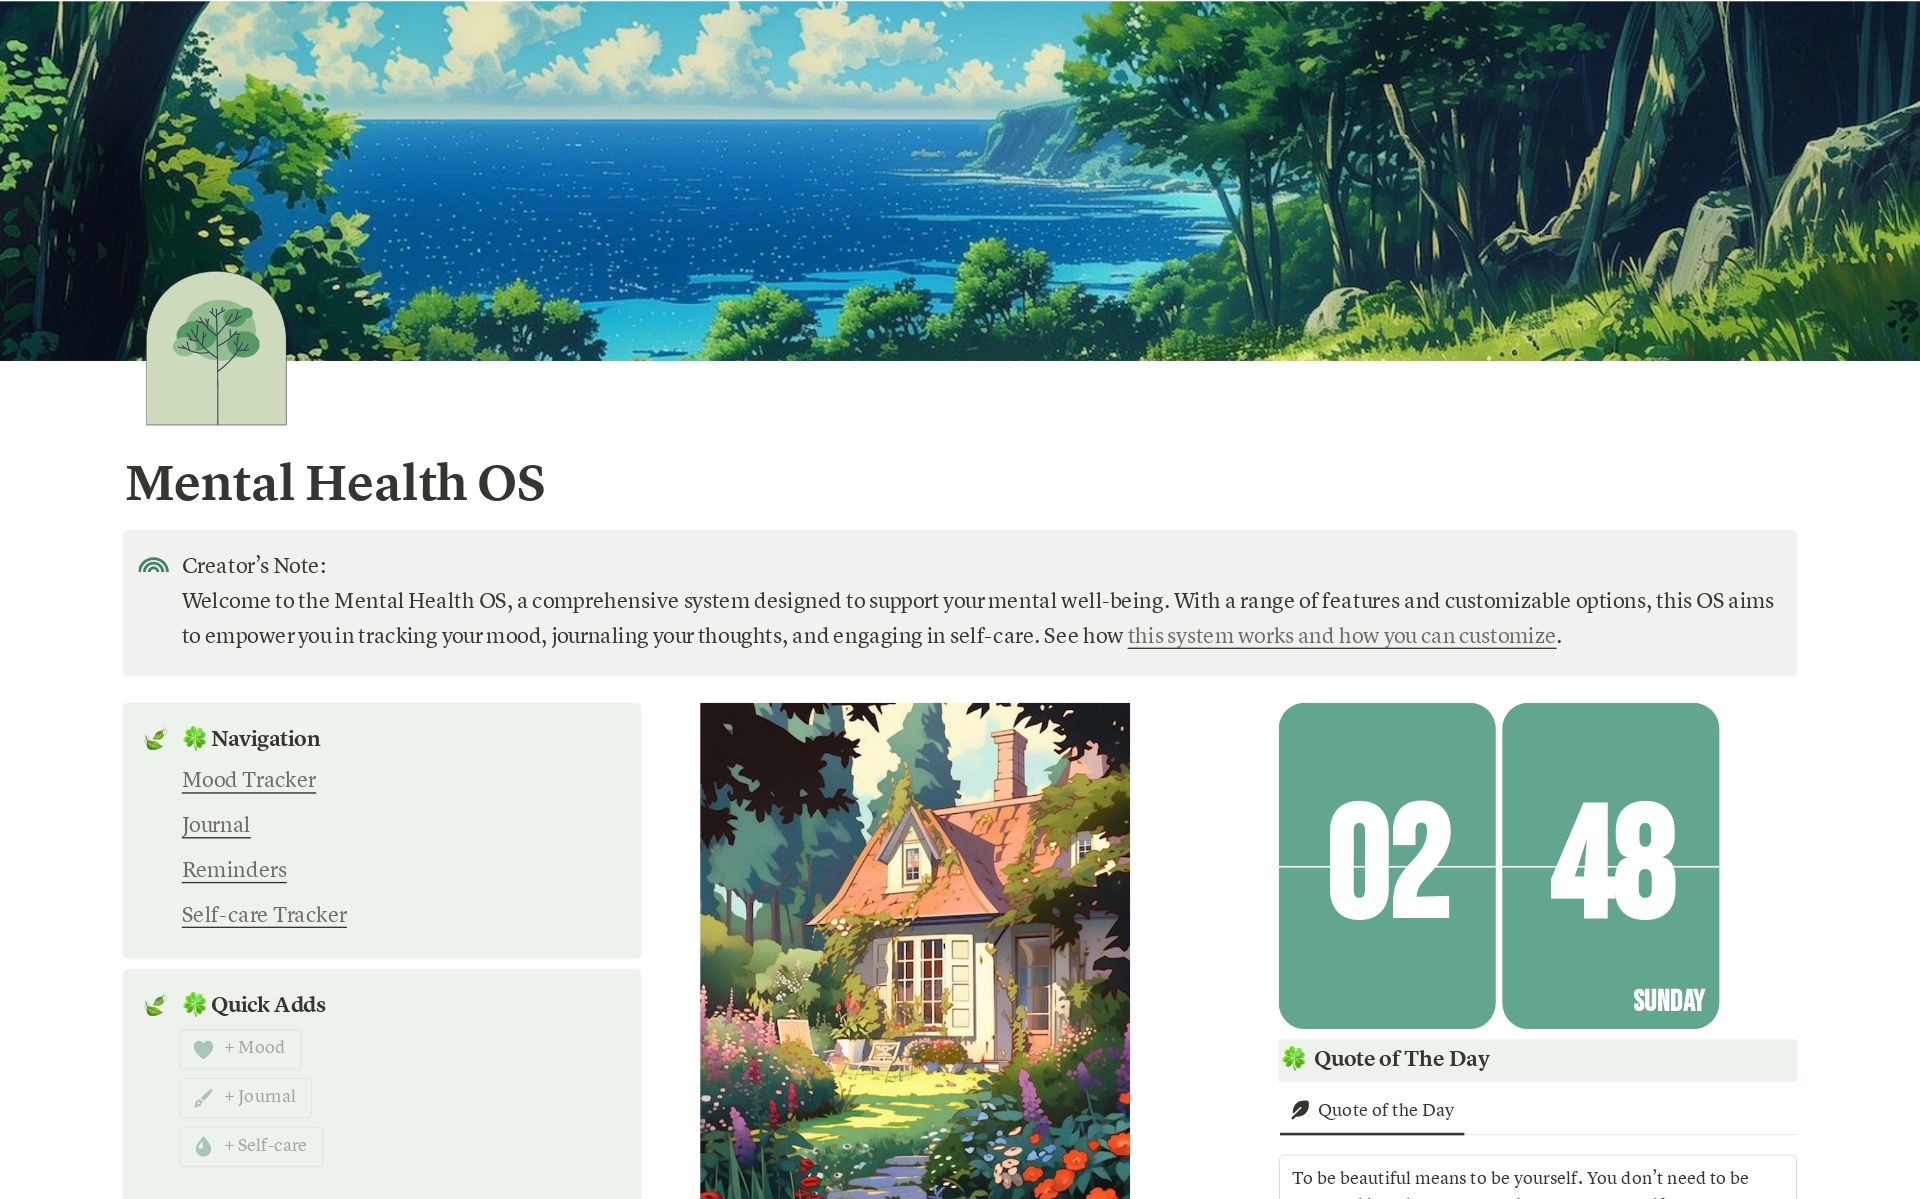 The Mental Health OS, a comprehensive system designed to support your mental well-being. With a range of features and customizable options, this OS aims to empower you in tracking your mood, journaling your thoughts, and engaging in self-care.